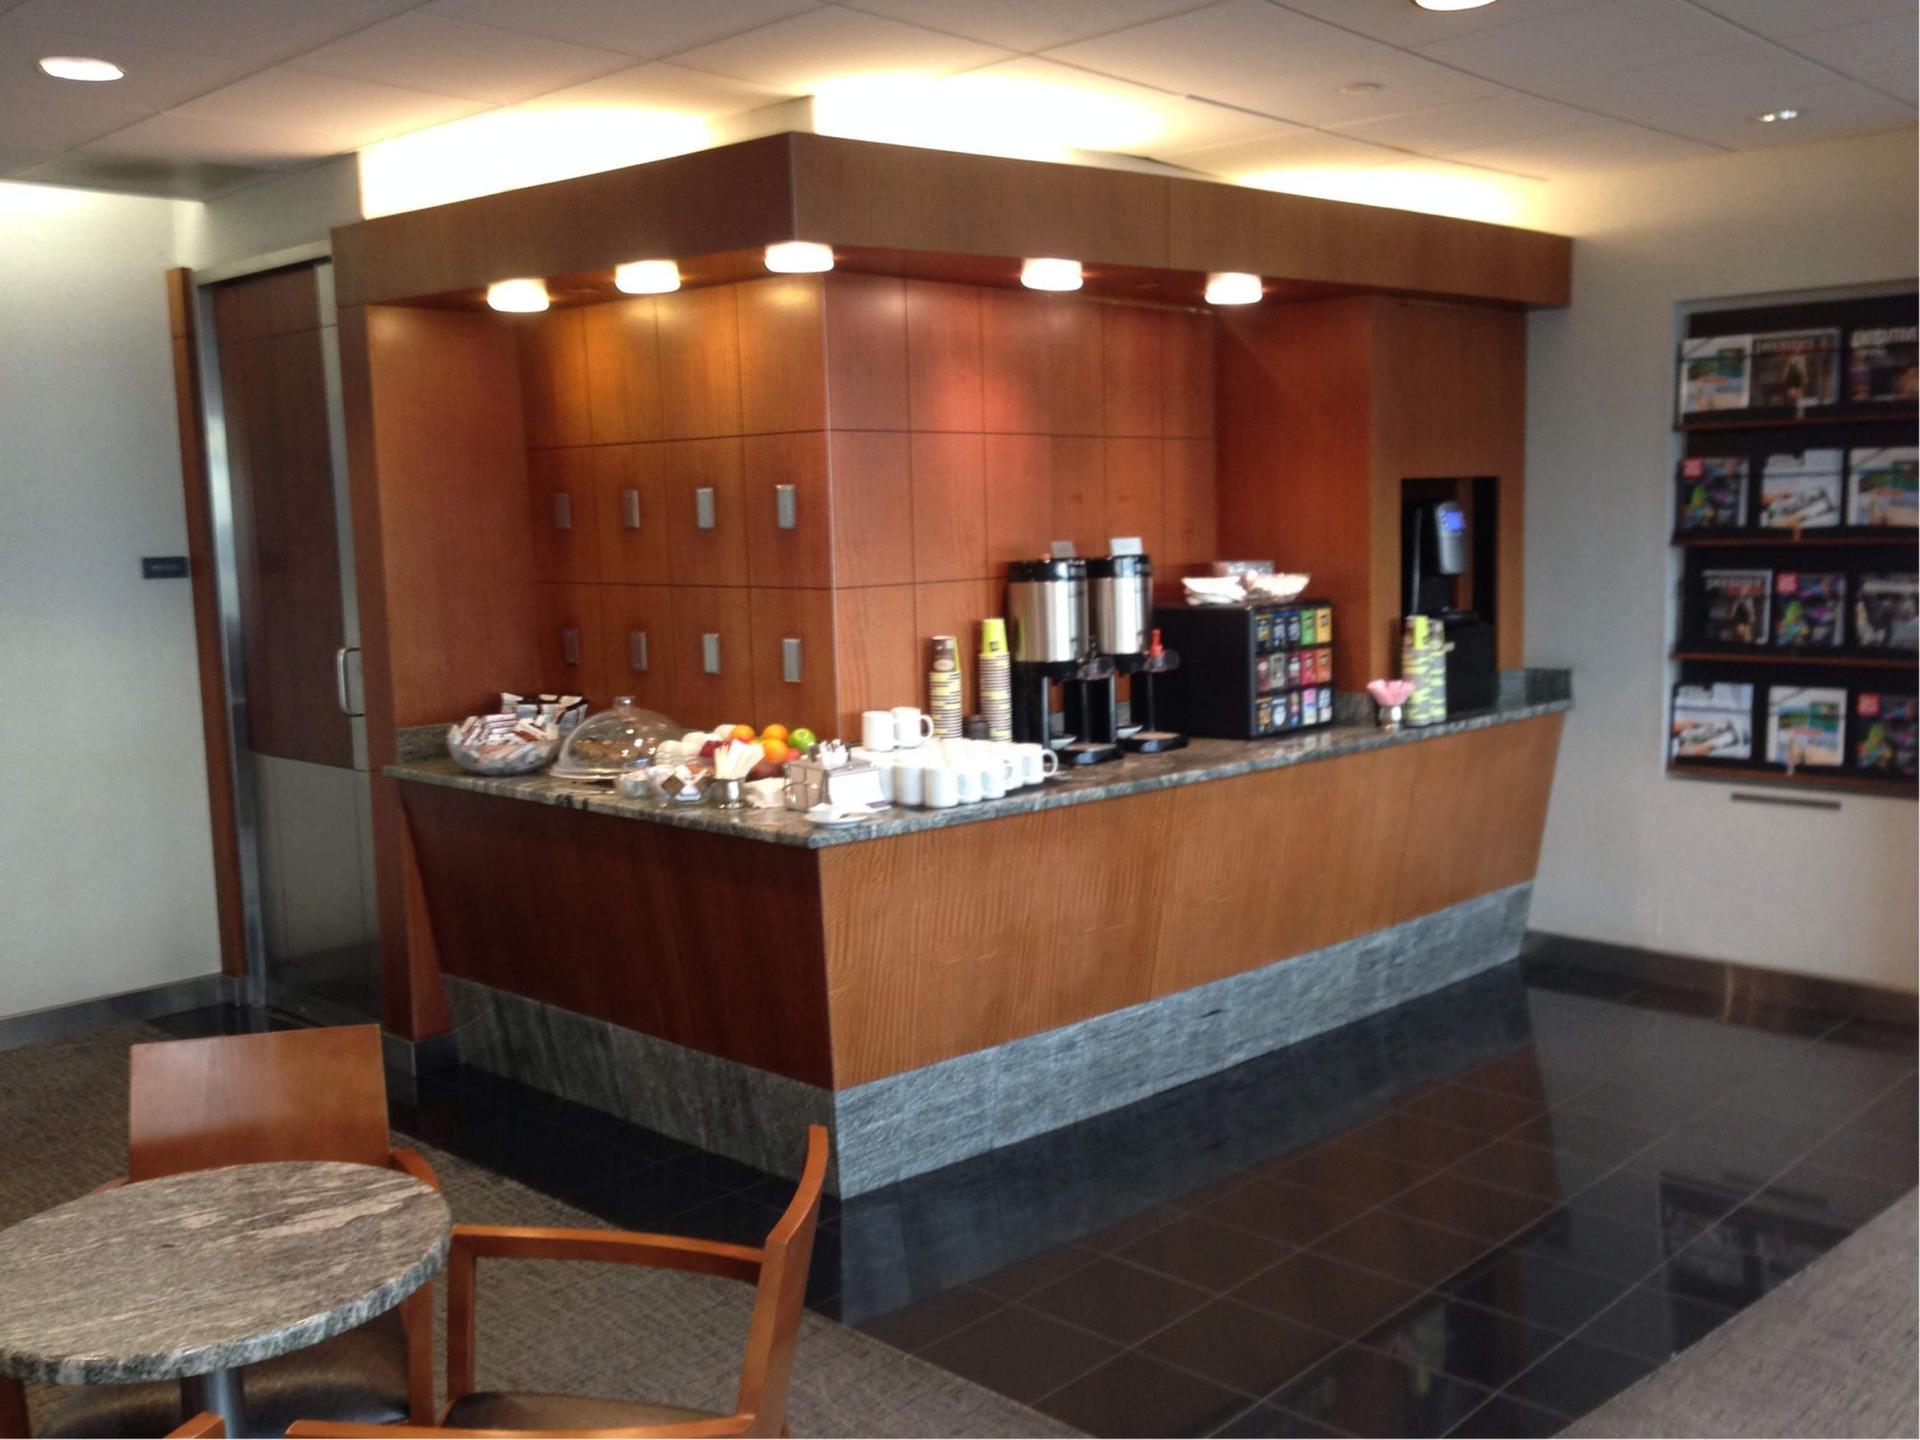 American Airlines Admirals Club image 4 of 48